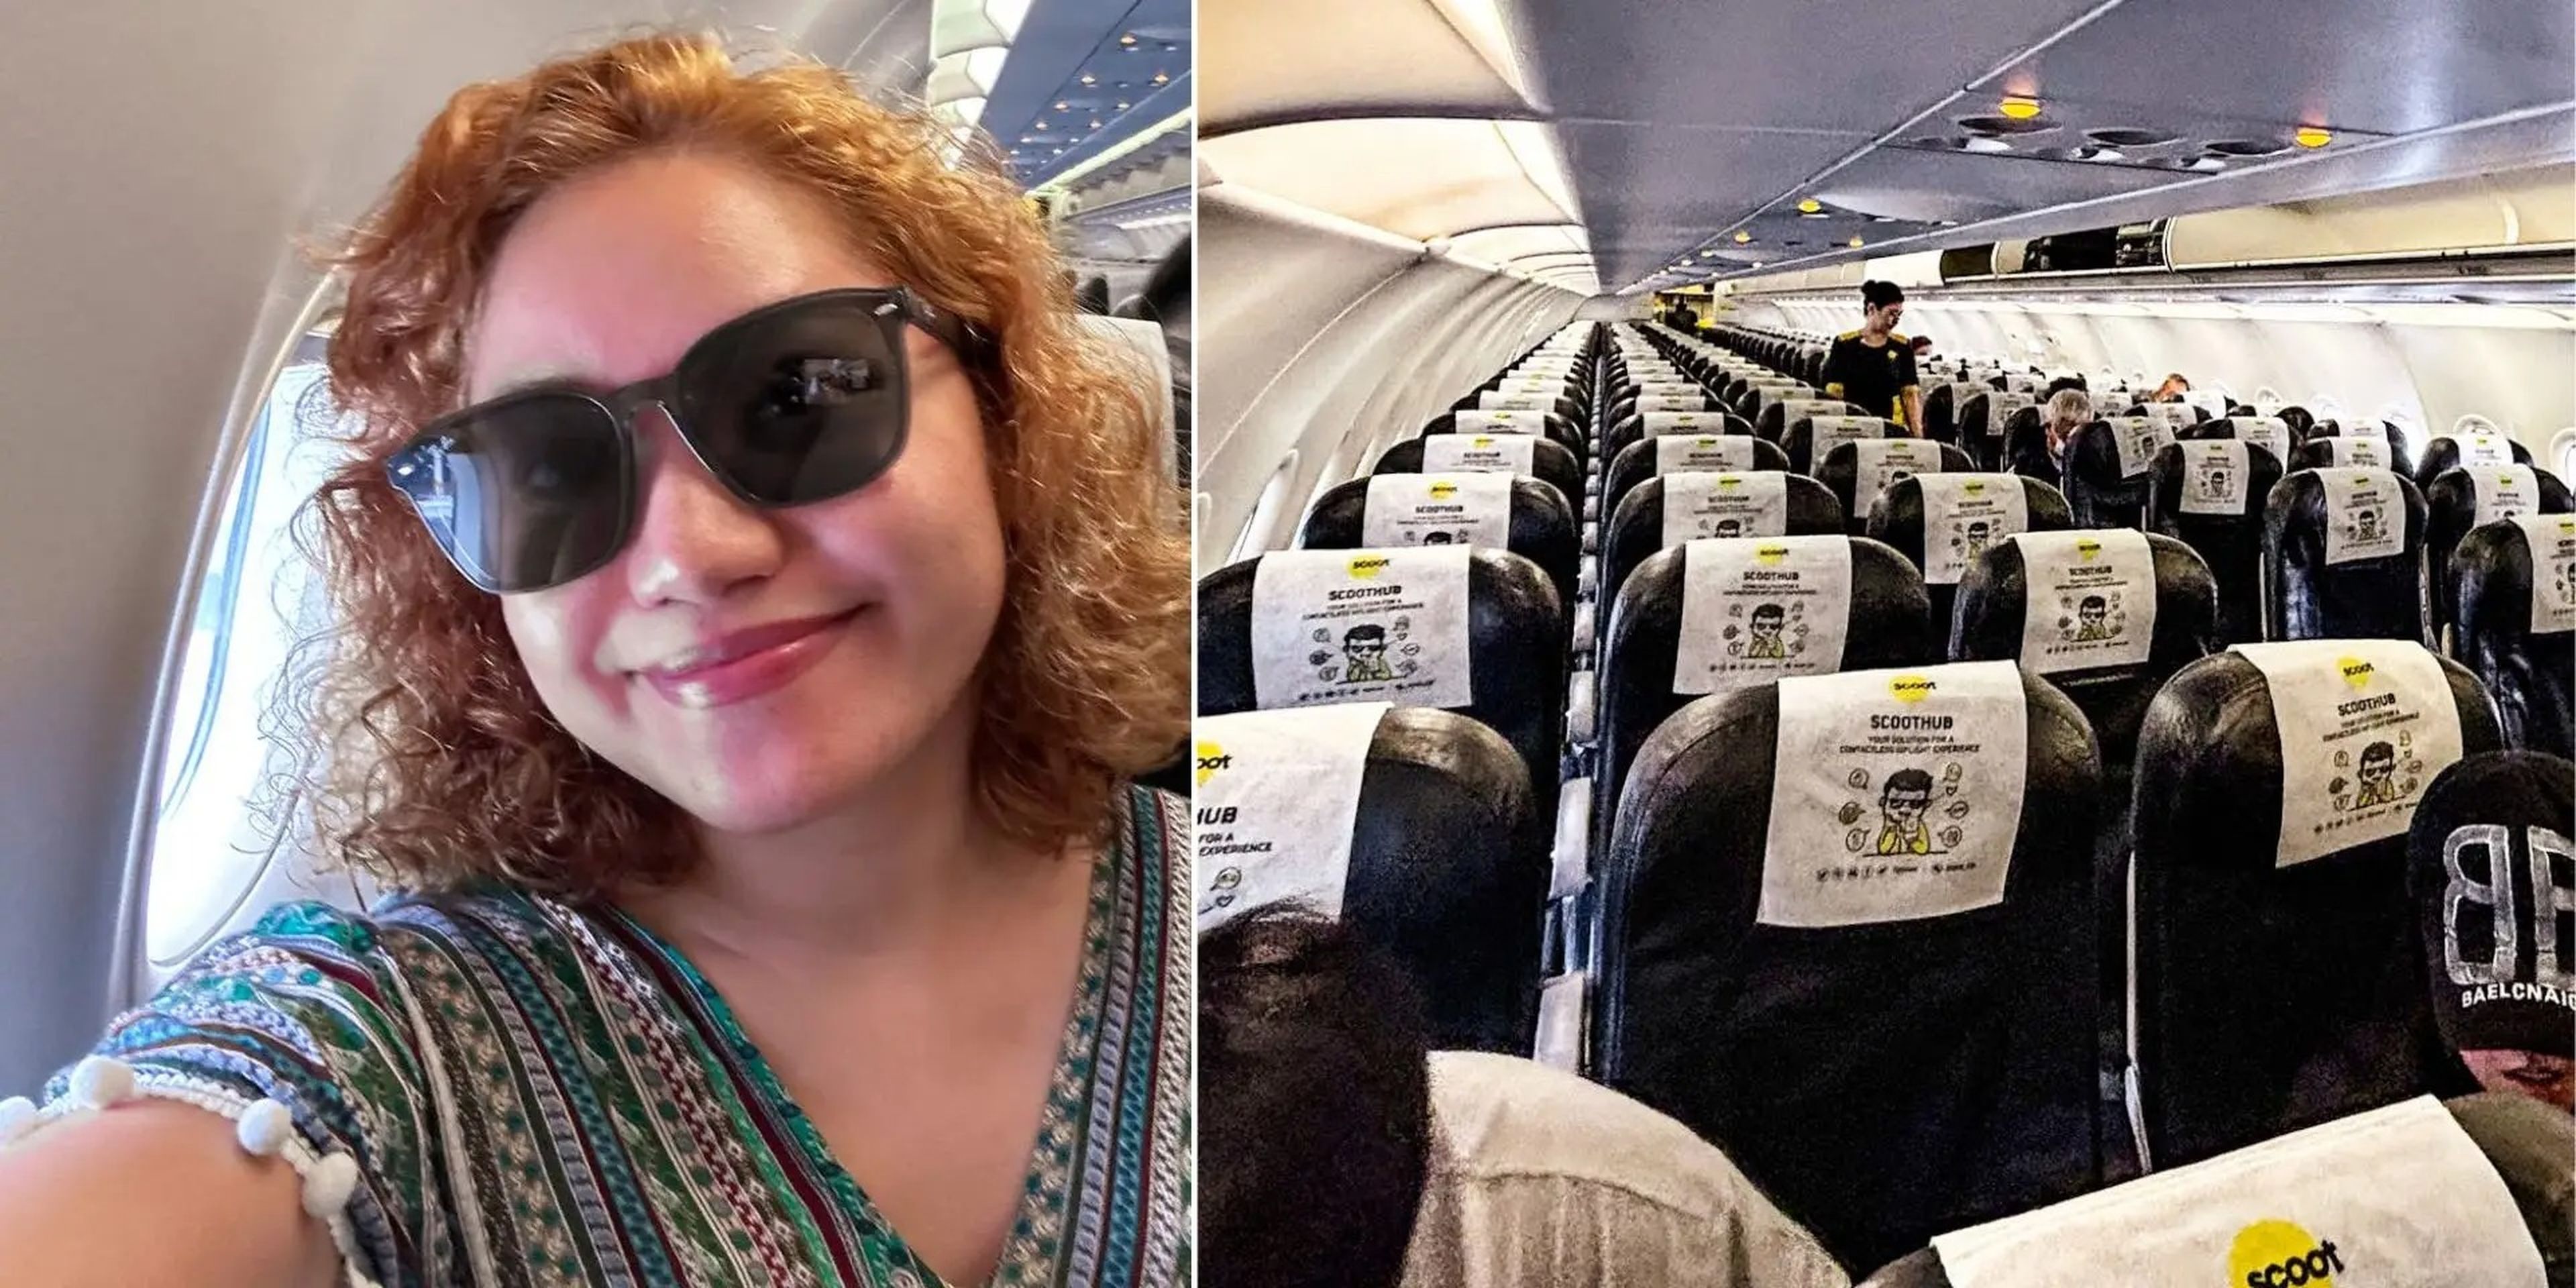 A composite image of a selfie of the author seated on the plane and a photo of the plane's seats.